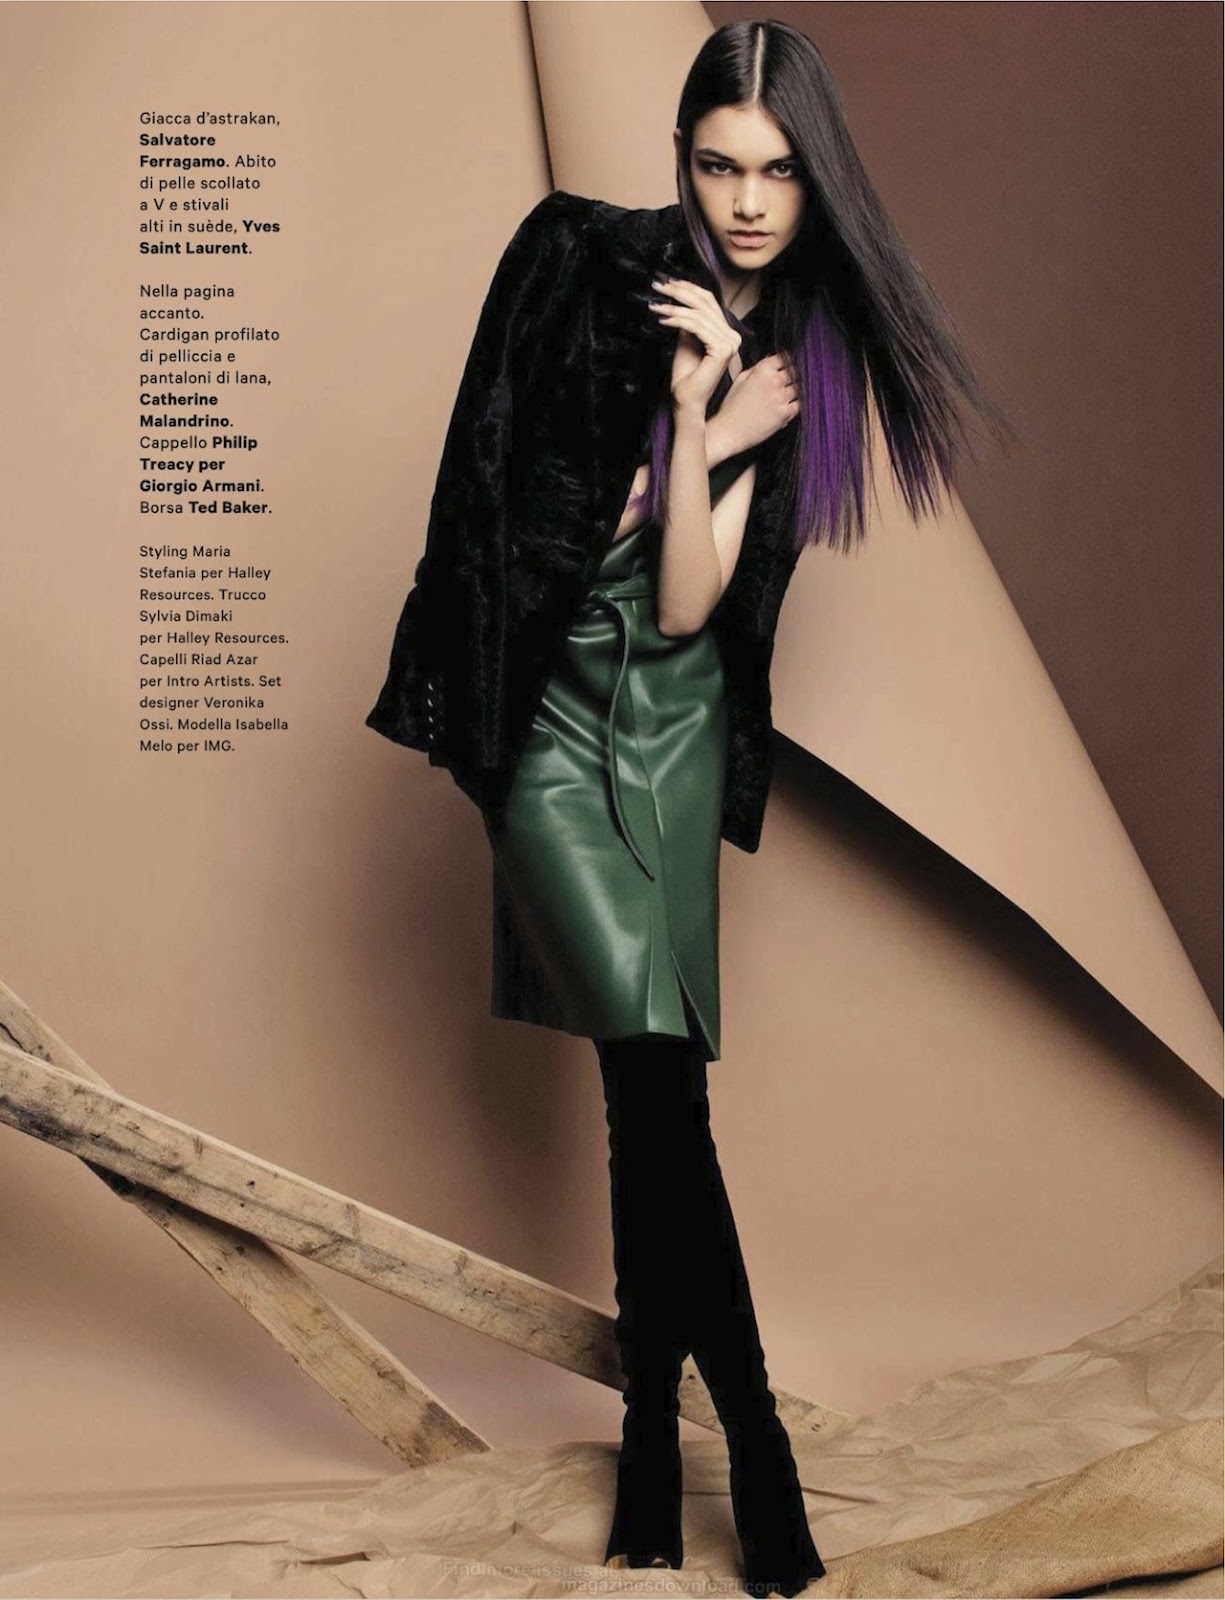 bloc notes: isabello melo by richard machado for amica august 2012 ...